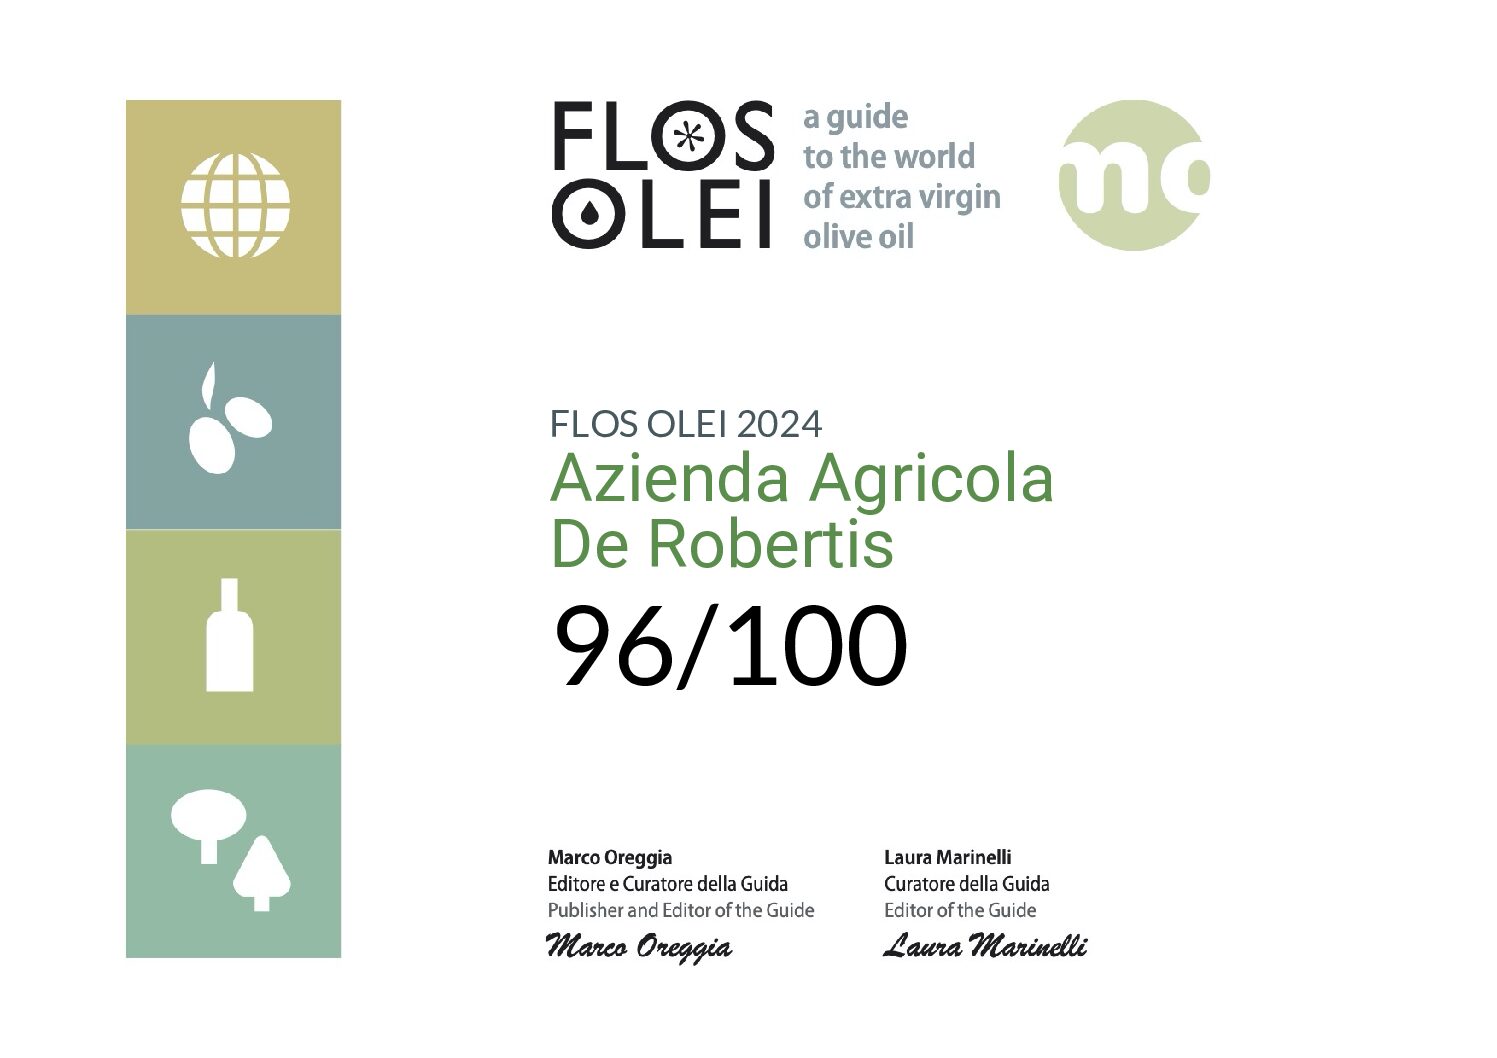 Flos Olei Guide 2024 gives our CHIAROSCURO EVOO a well deserved